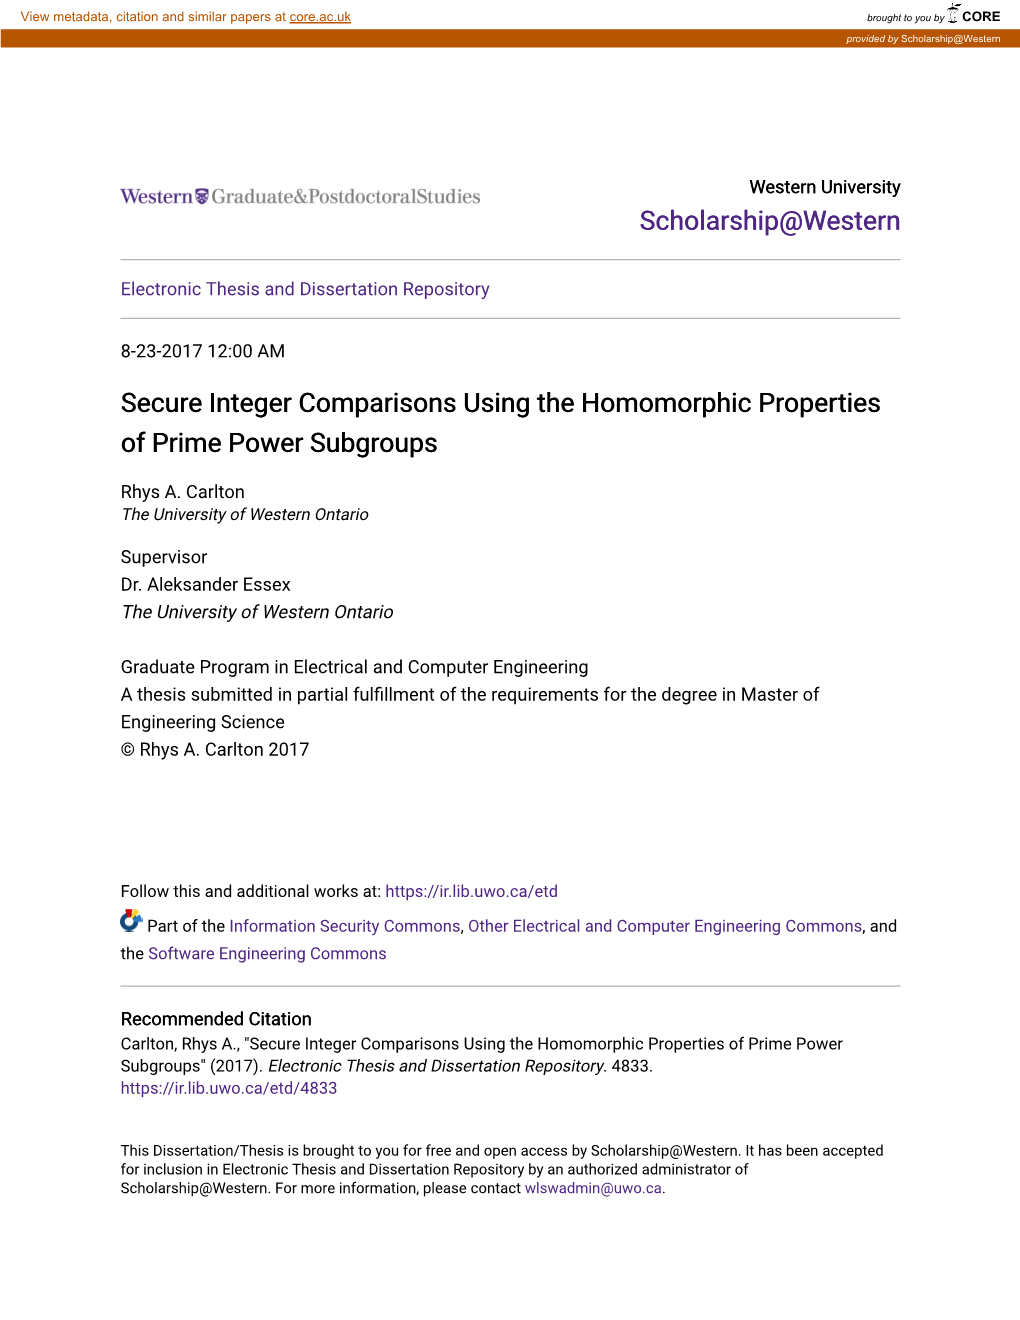 Secure Integer Comparisons Using the Homomorphic Properties of Prime Power Subgroups